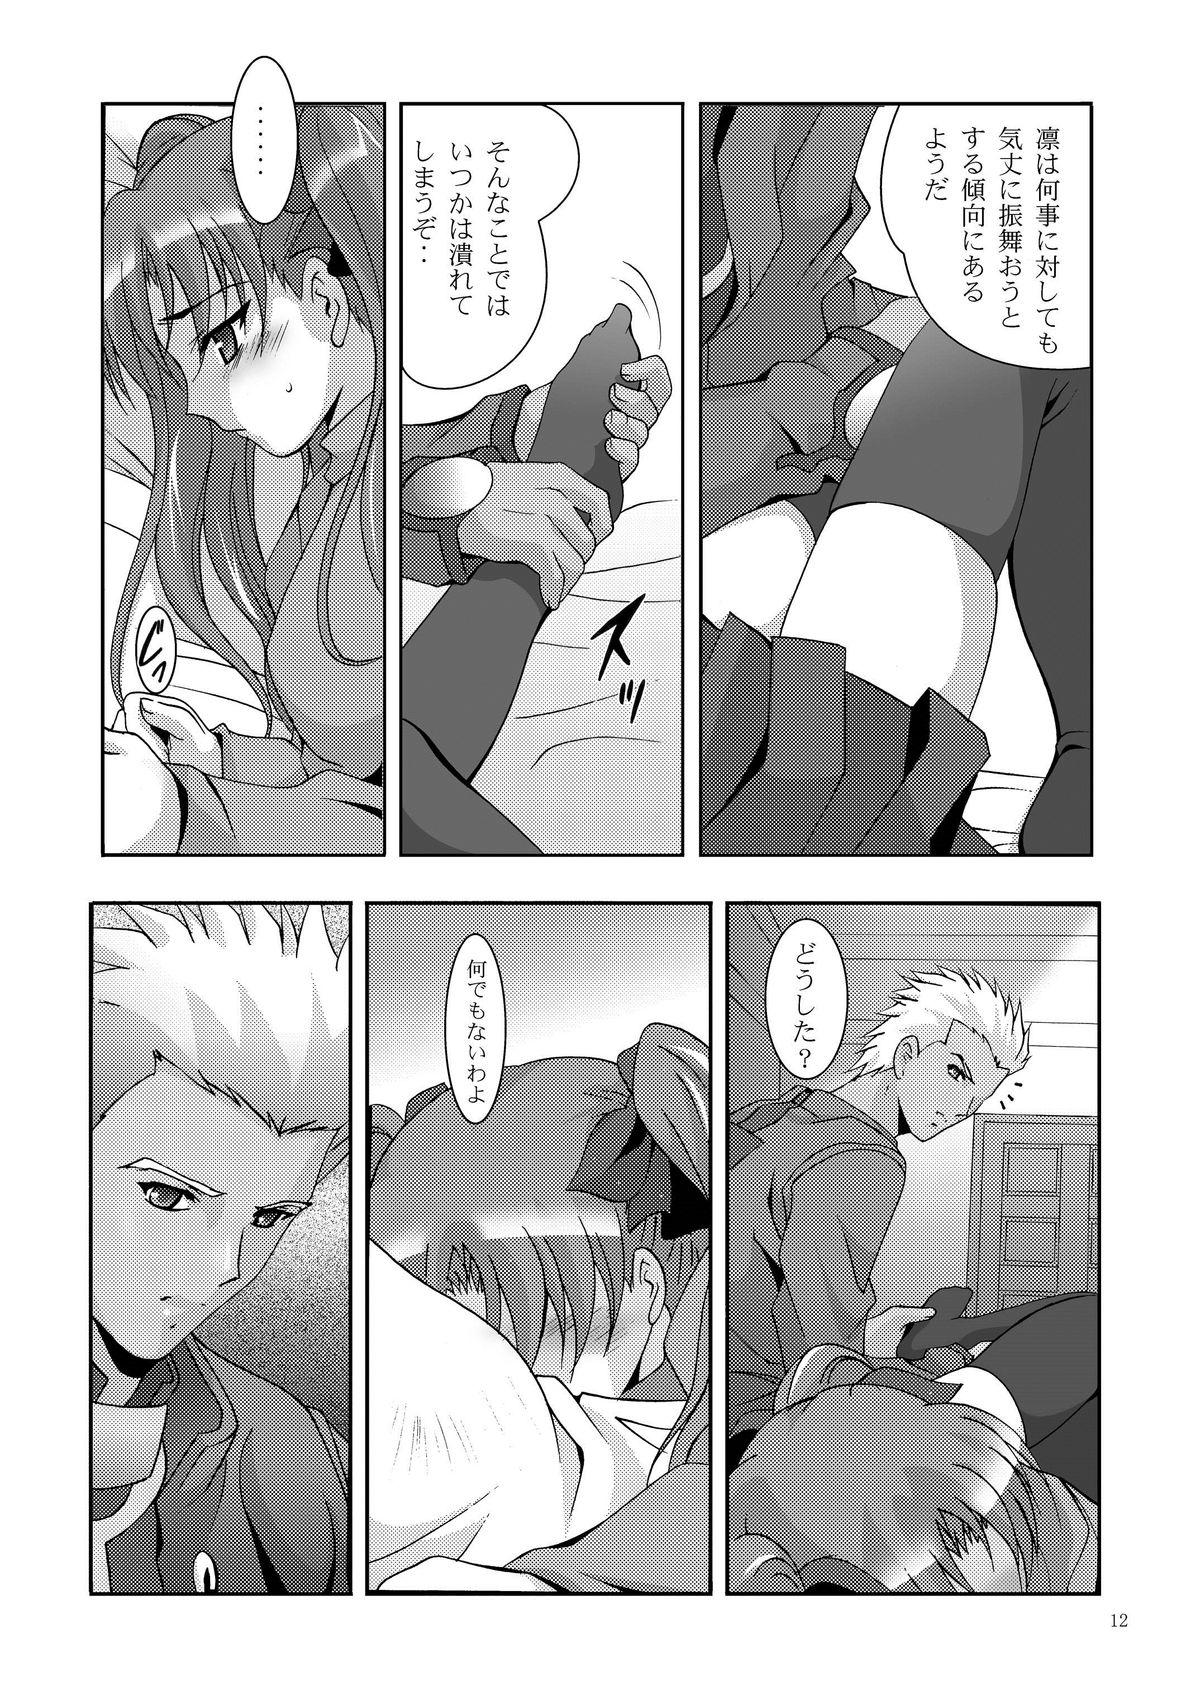 Daring MOUSOU THEATER 19 - Fate stay night Escort - Page 12